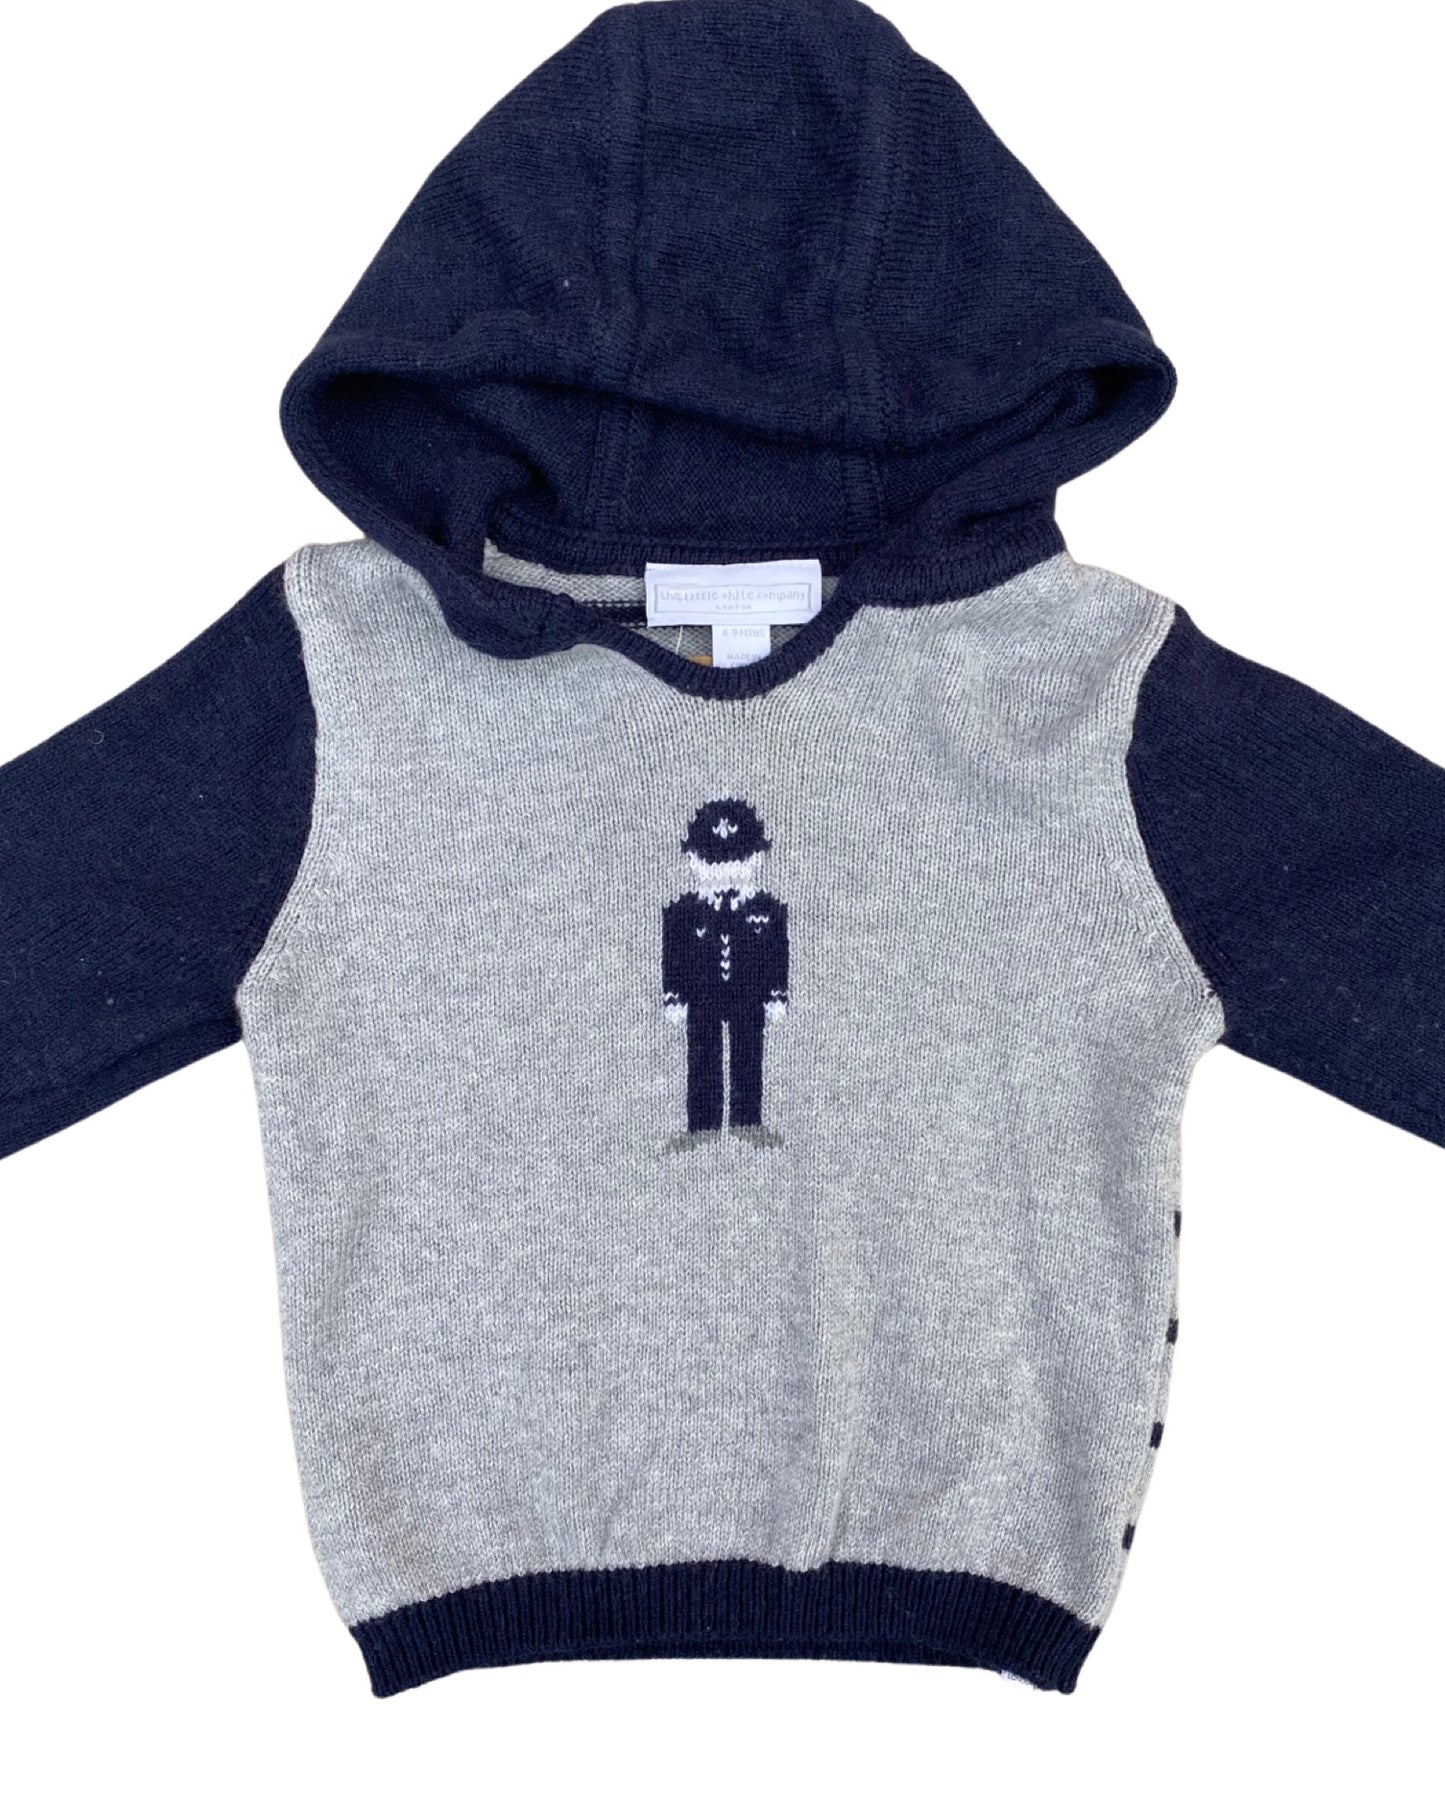 The Little White Company grey/navy hooded knitted jumper (6-9mths)